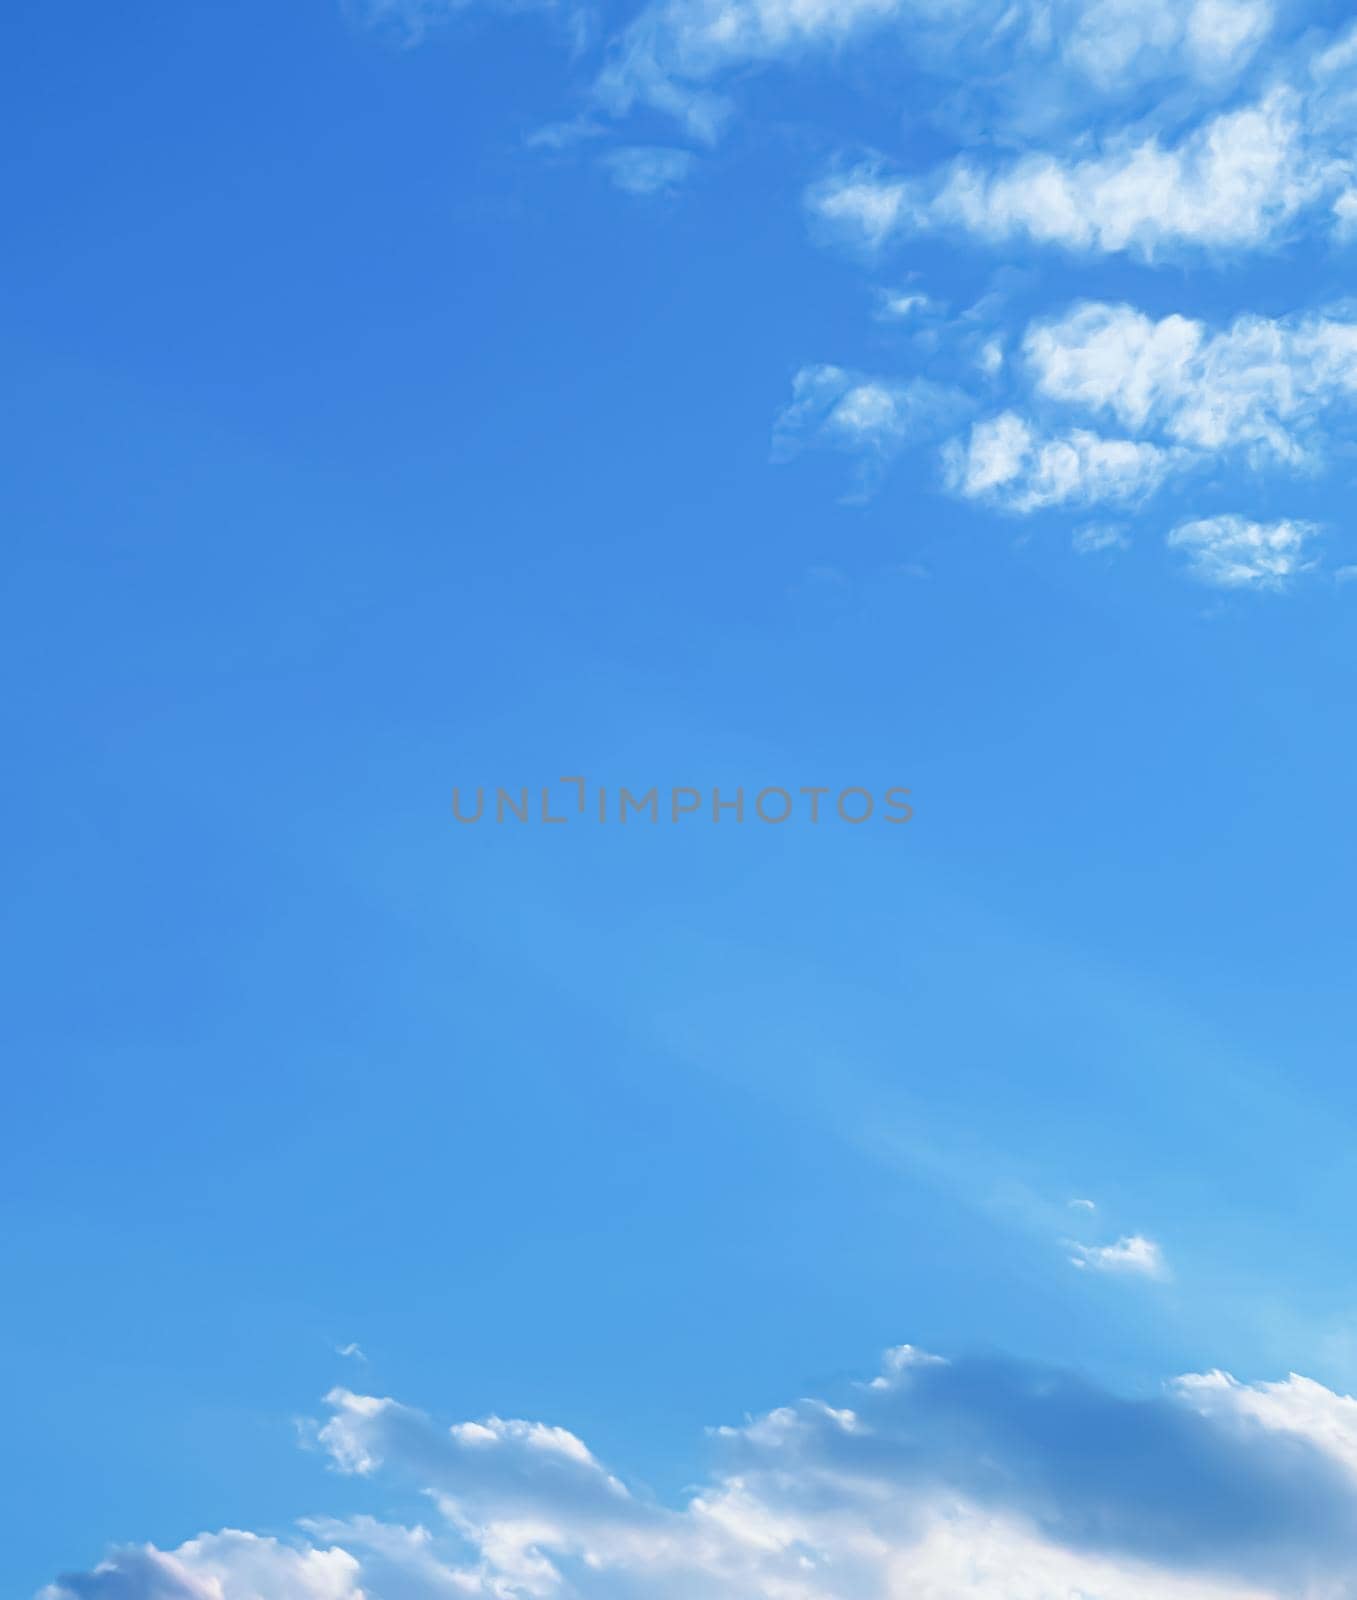 Sunny blue sky as abstract background, beauty in nature design concept